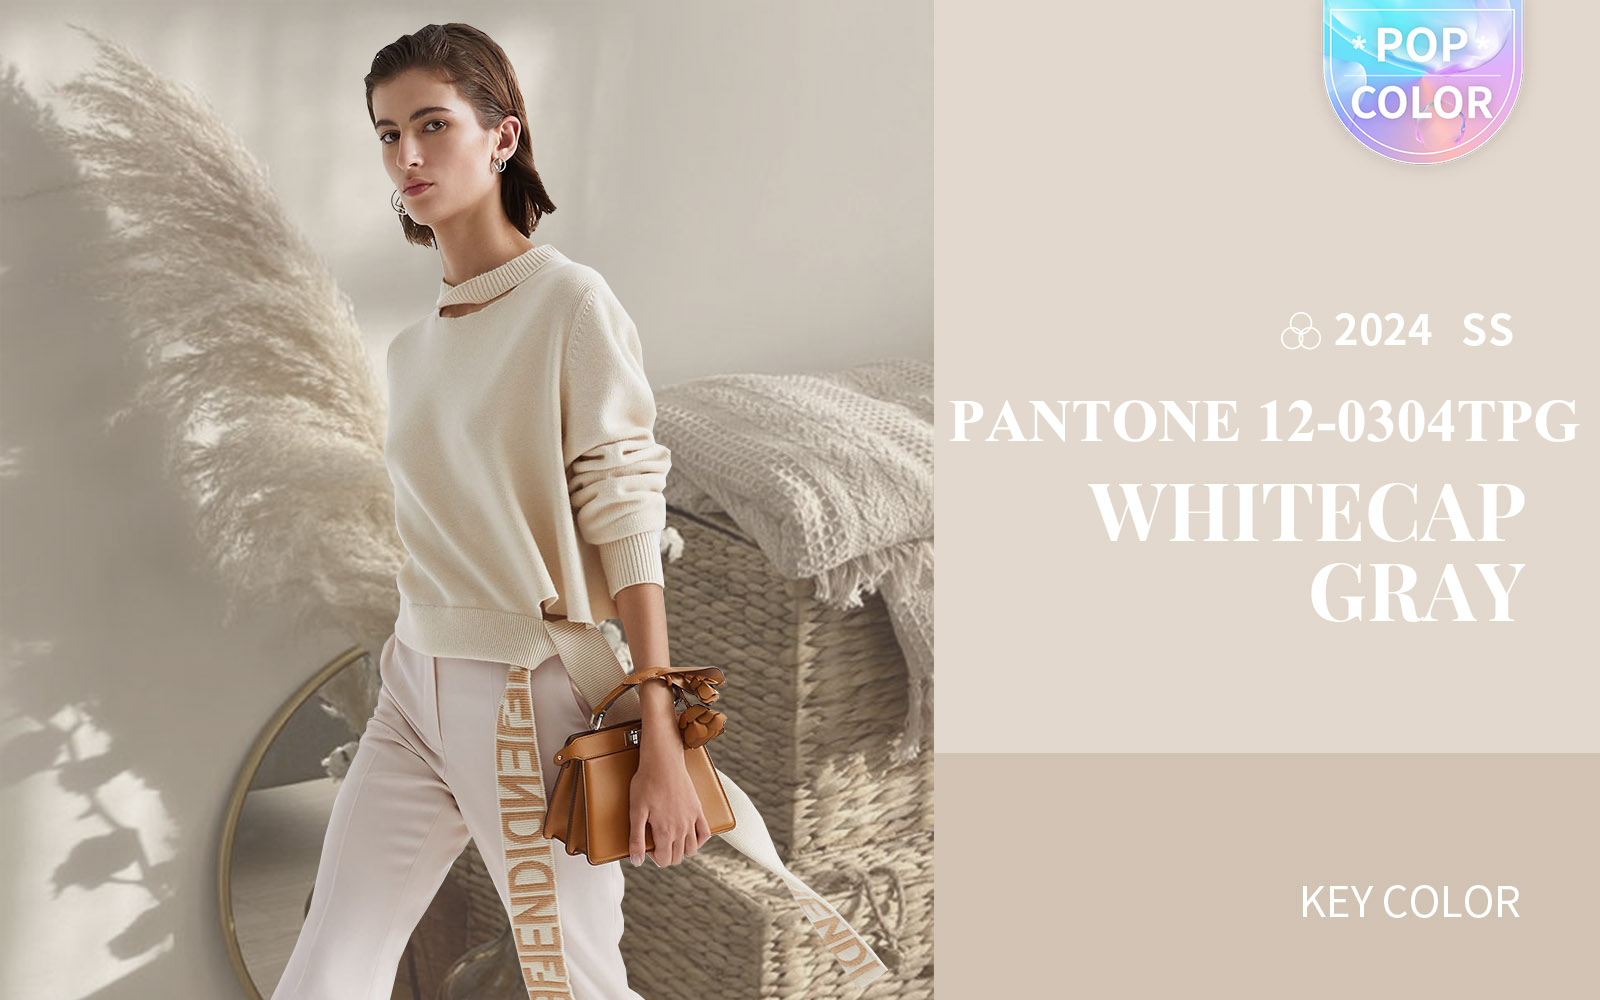 Whitecap Gray -- The Color Trend for Women's Knitwear